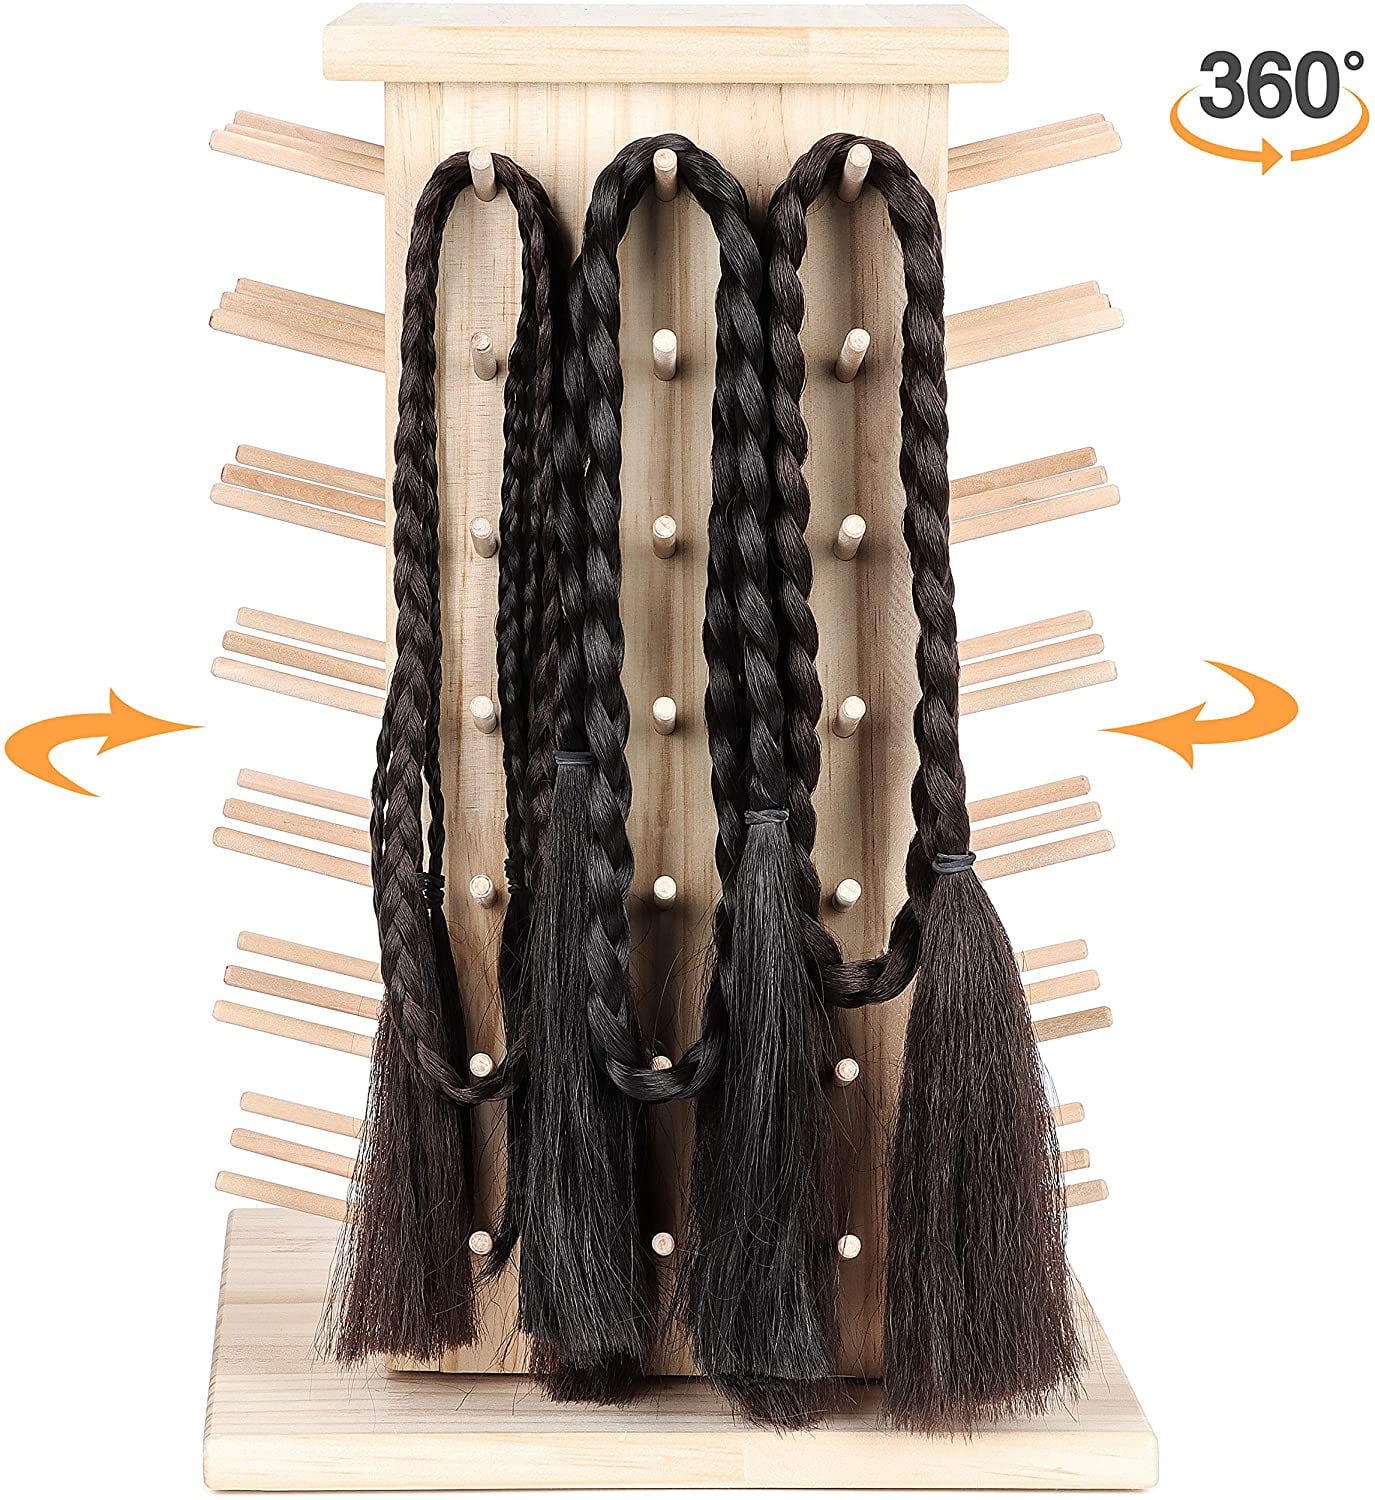 Nian Feng Braiding Hair Rack Stand for Hair Stylist, Wooden Thread Holders for Spools of Thread,60-Spools Holder for Sewing Machine, Thread Racks